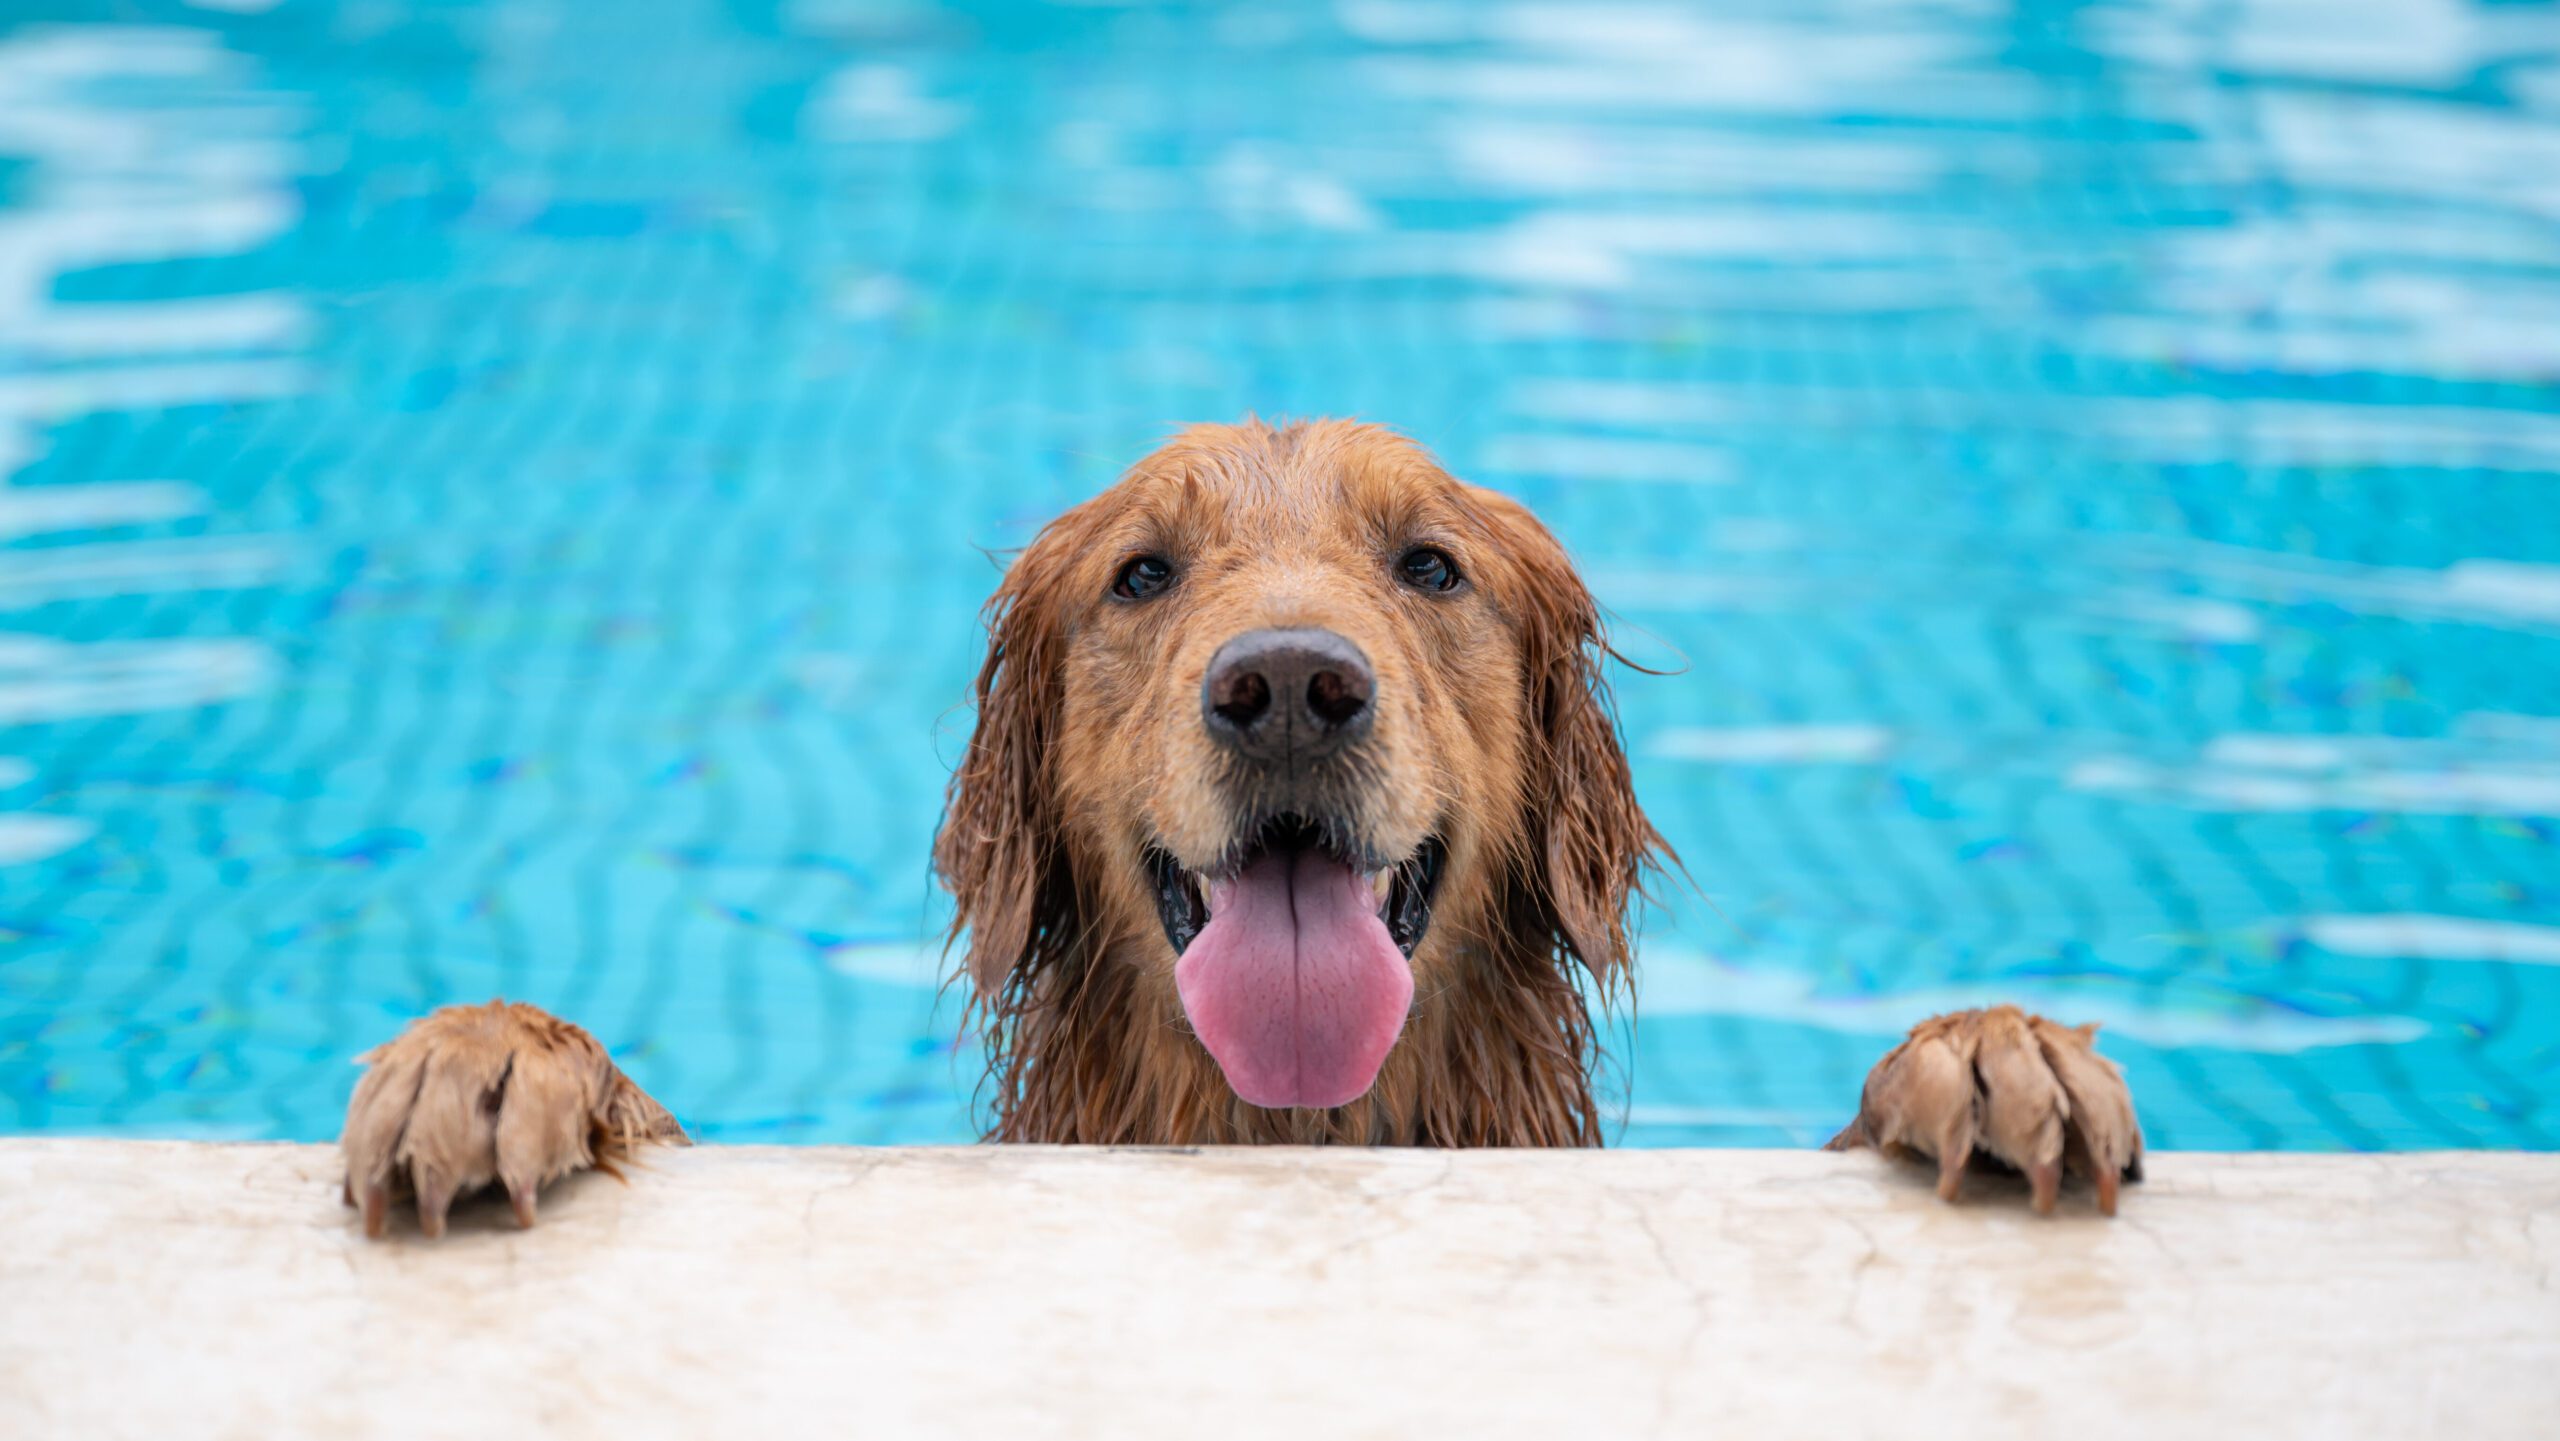 Swimming pools can be safe if proper precautions and supervision are in place, but not all dogs are natural swimmers!